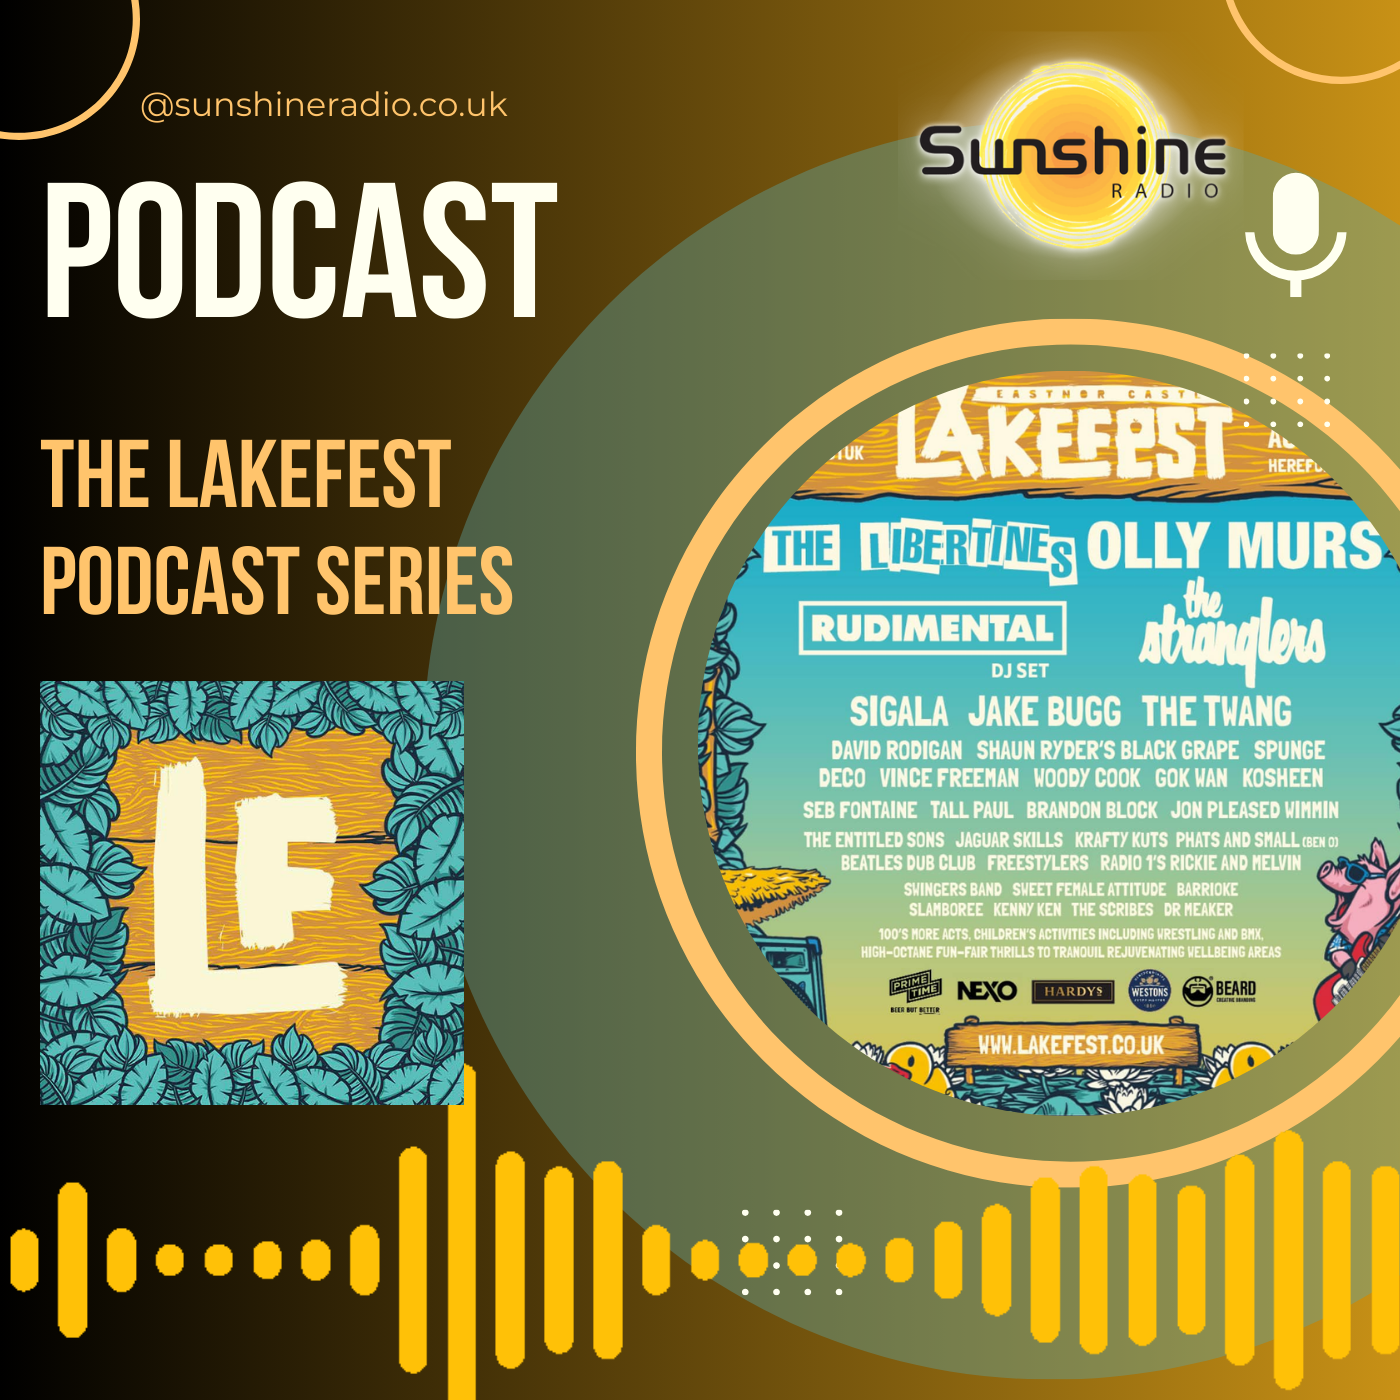 The Lakefest Podcast Series with Mark Edwards